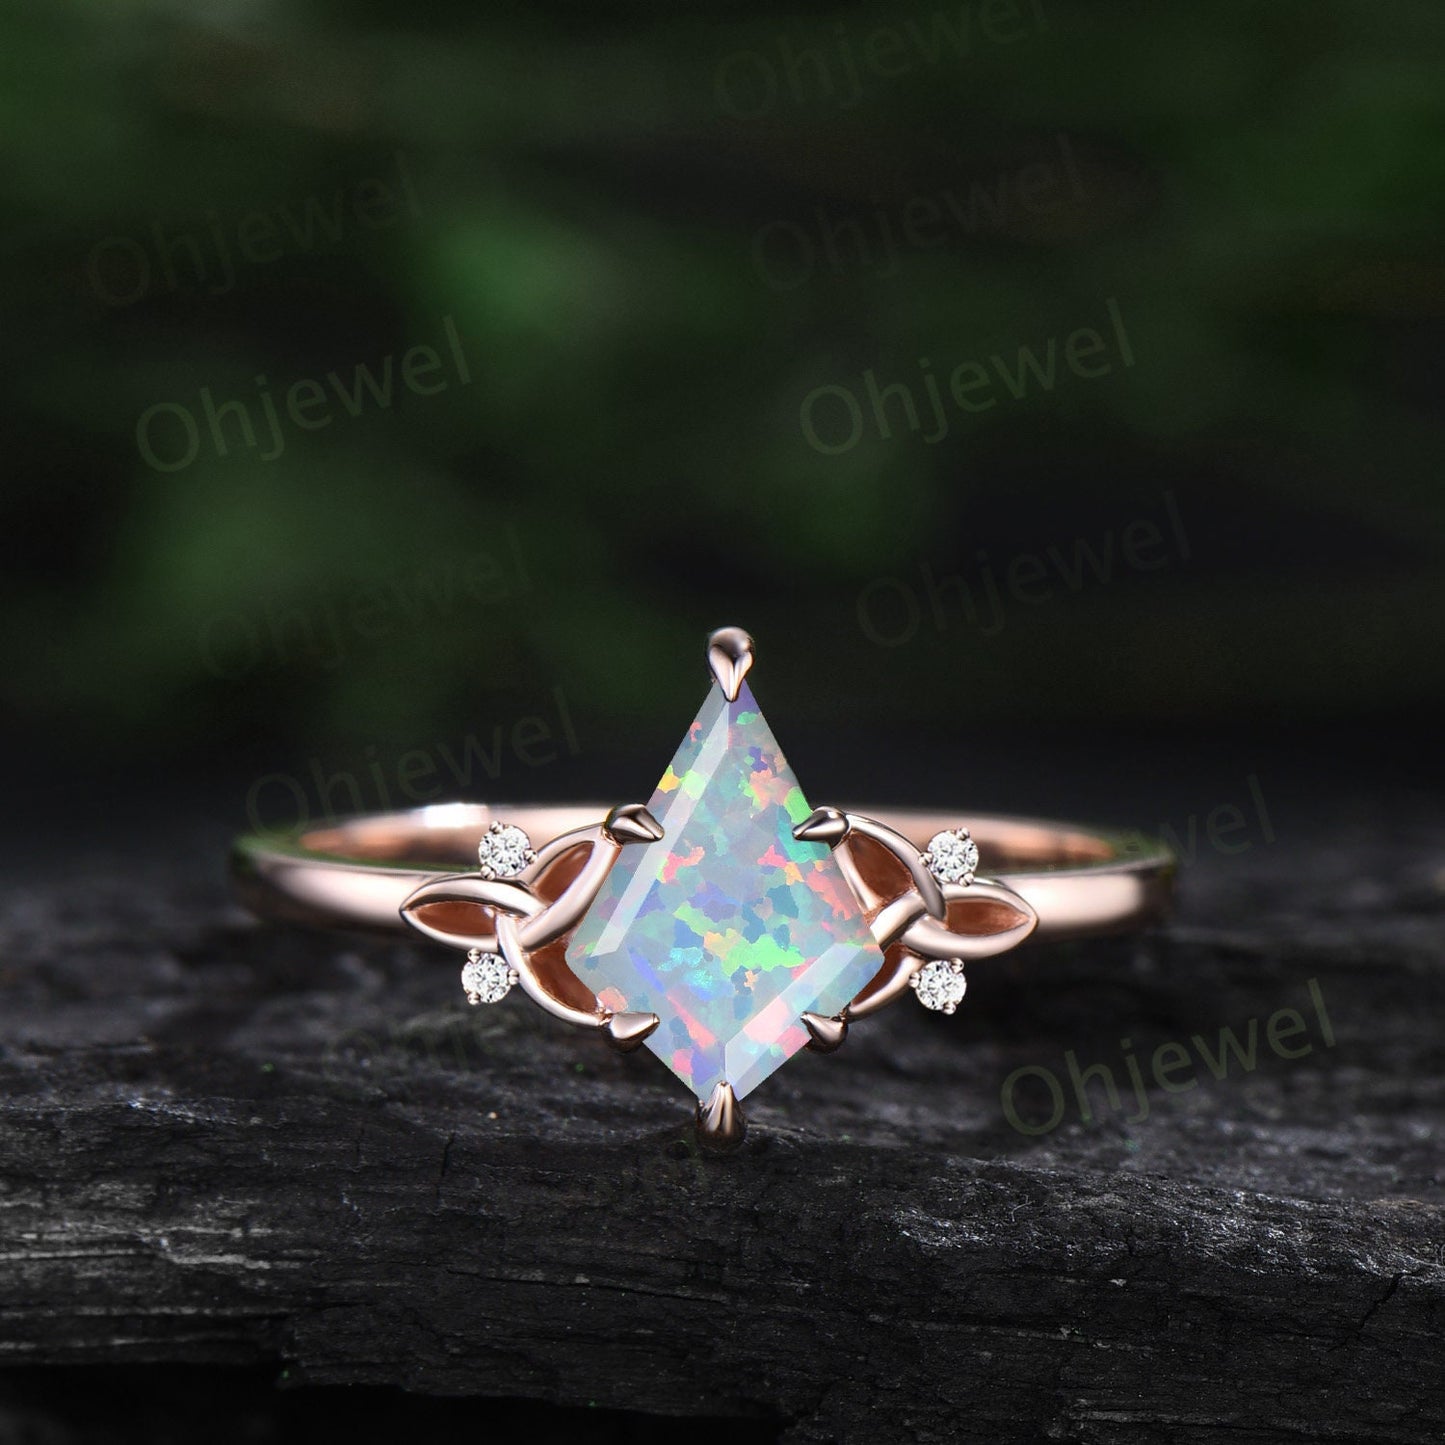 White opal ring women vintage Kite cut opal engagement ring Celtic Knot rose gold five stone cluster diamond ring unique promise ring set